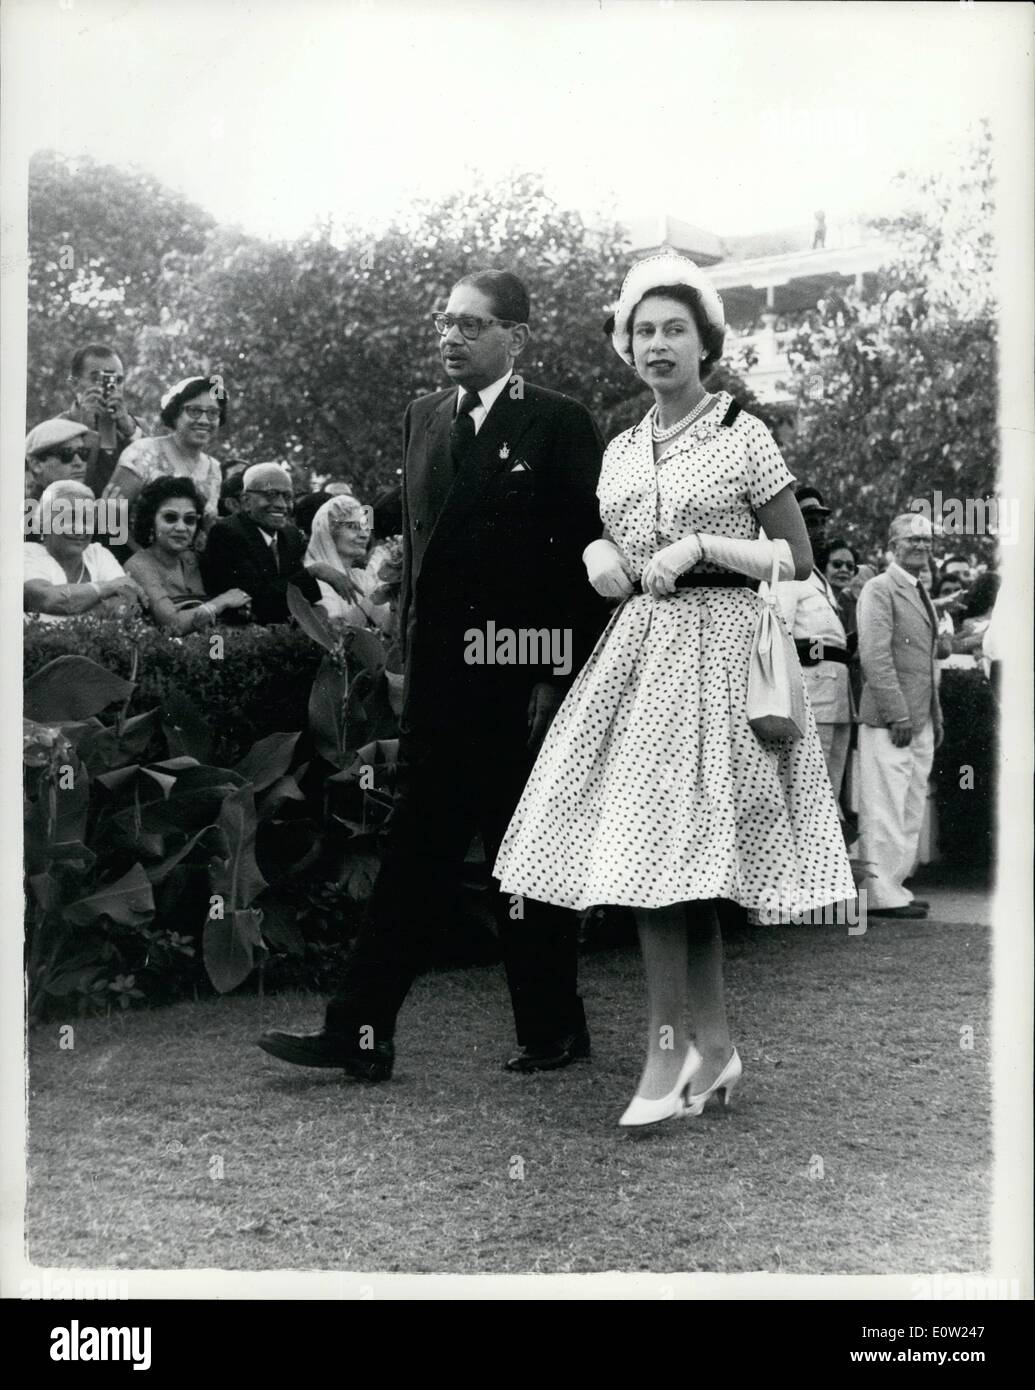 Feb. 02, 1961 - Royal Indian Tour. Queen Goes to Bombay races: H.M. The Queen and the Duke of Edinburgh yesterday spent a relaxed afternoon at Bombay Races - after a strenuous morning. Photo shows H.M. The Queen wears a blue polka-dot white dress - during her visit to Bombay Races. Stock Photo